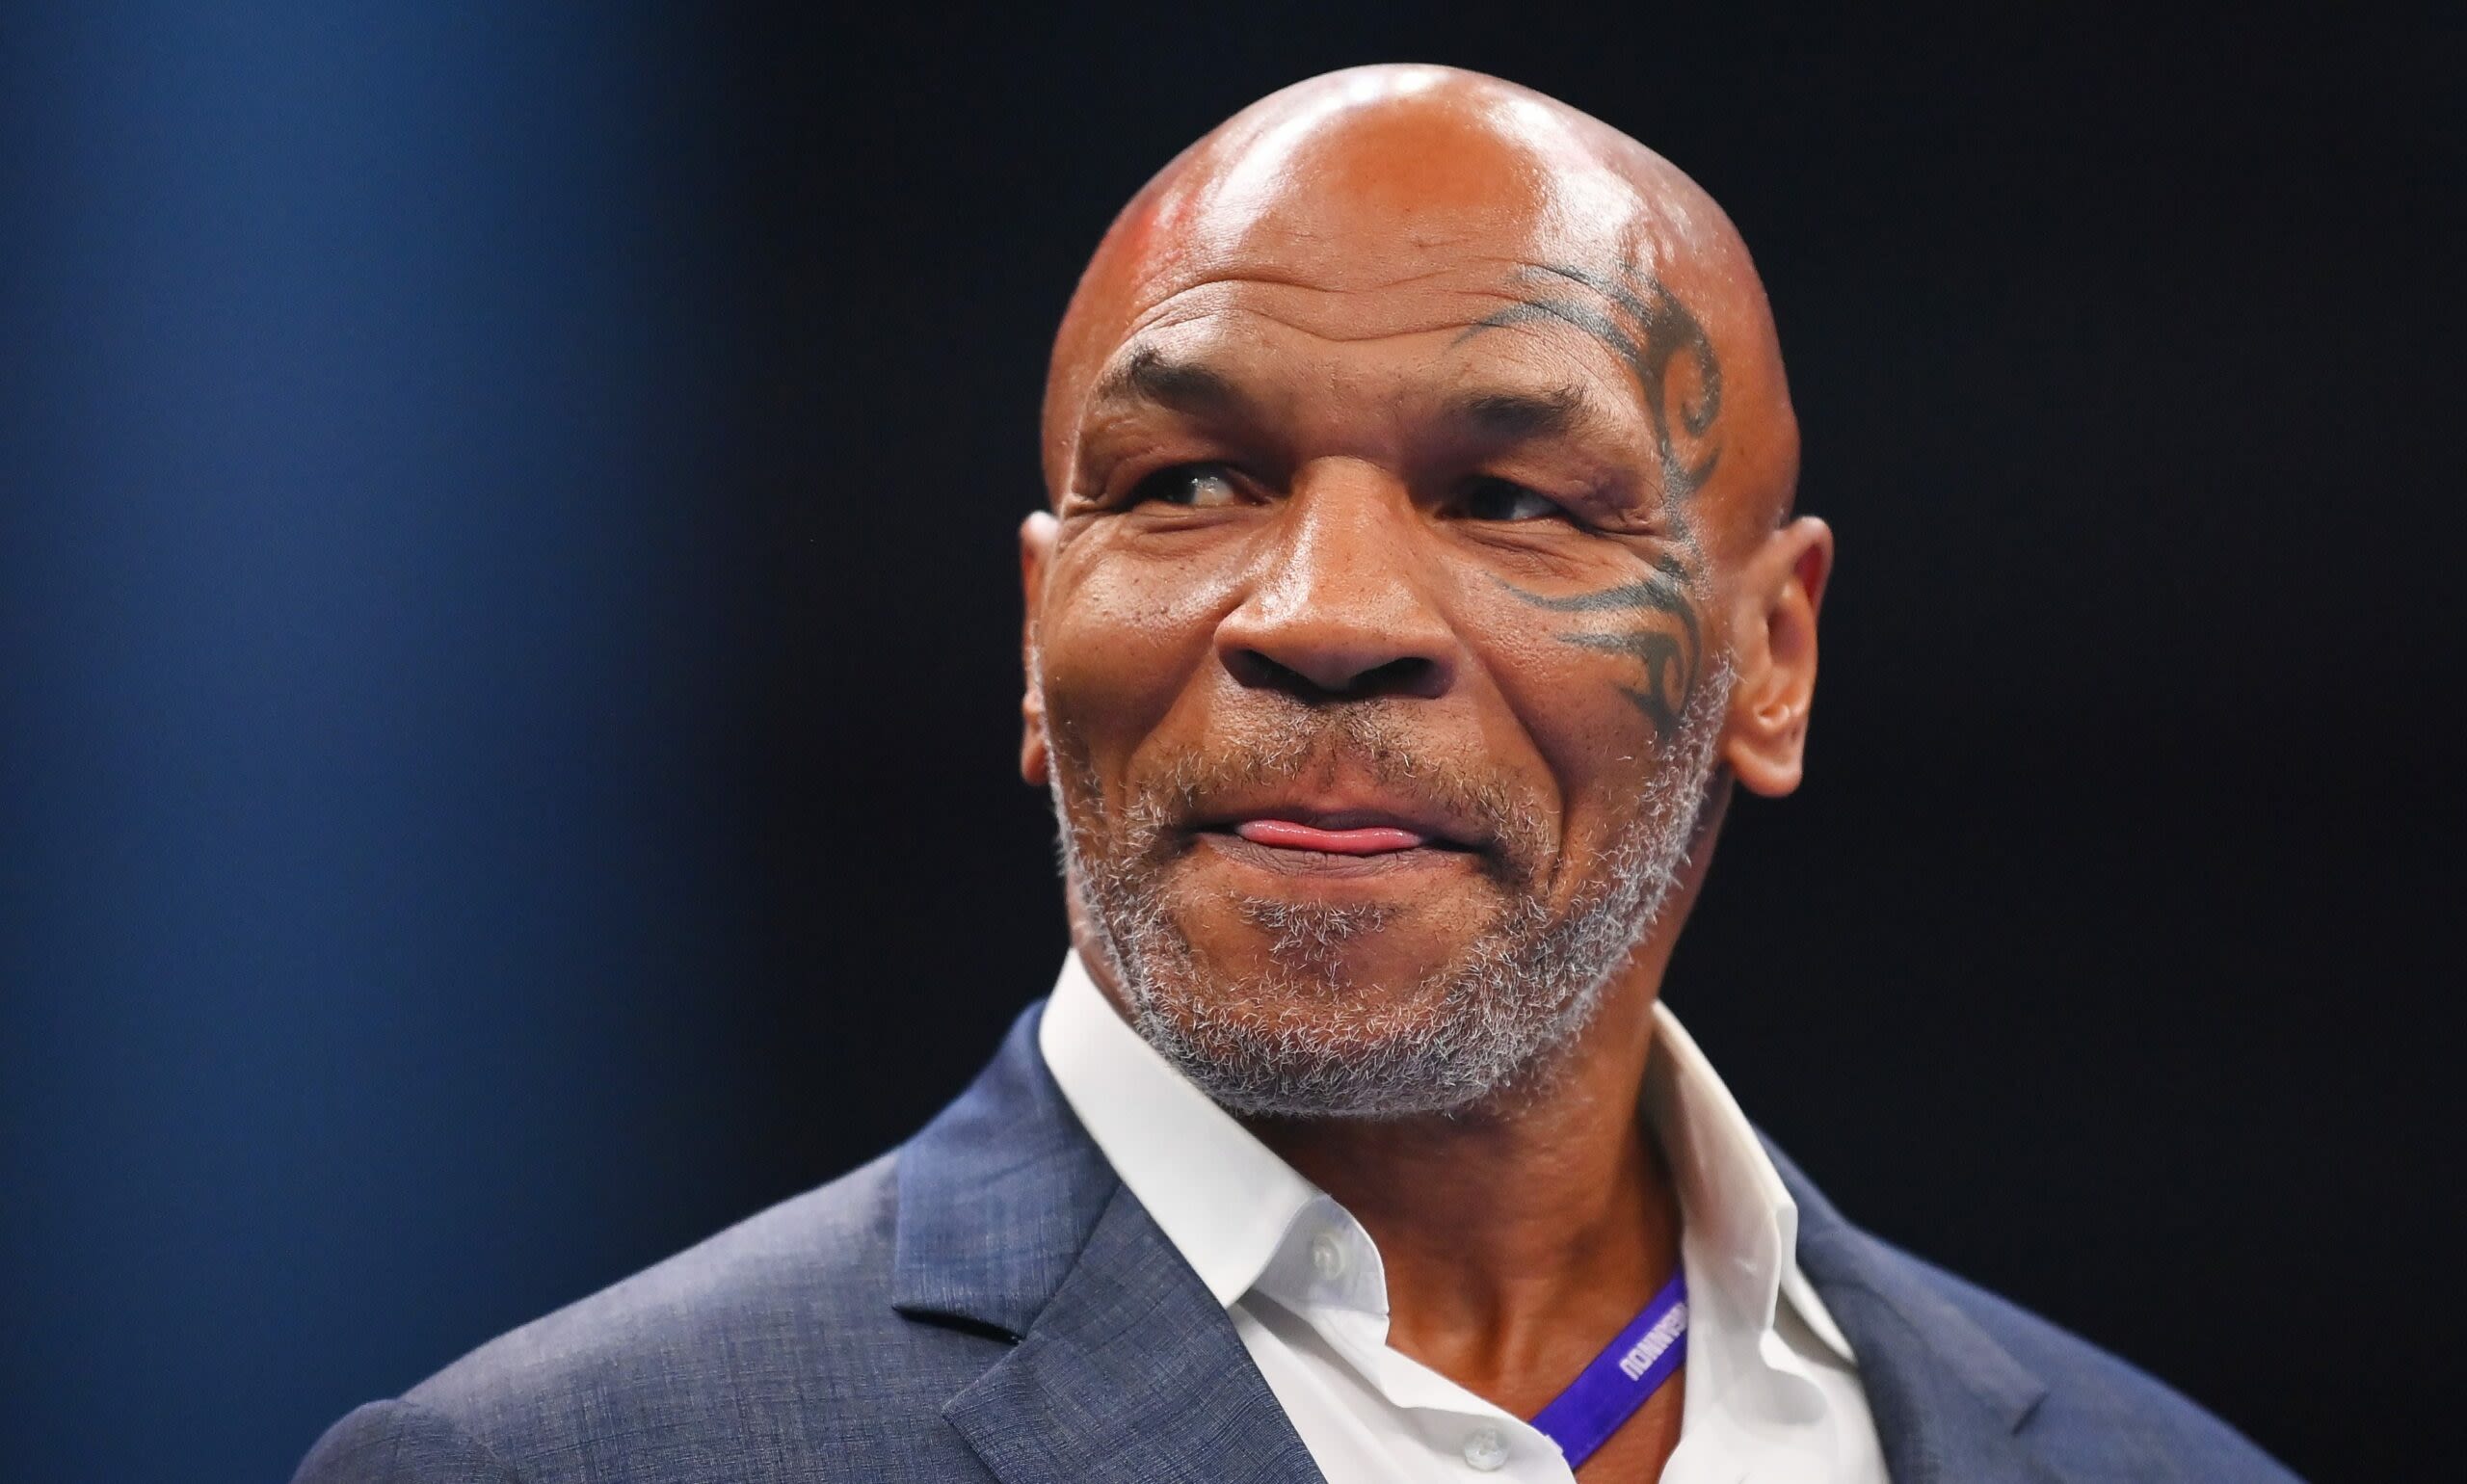 Mike Tyson has medical emergency on cross country flight, ‘doing great’